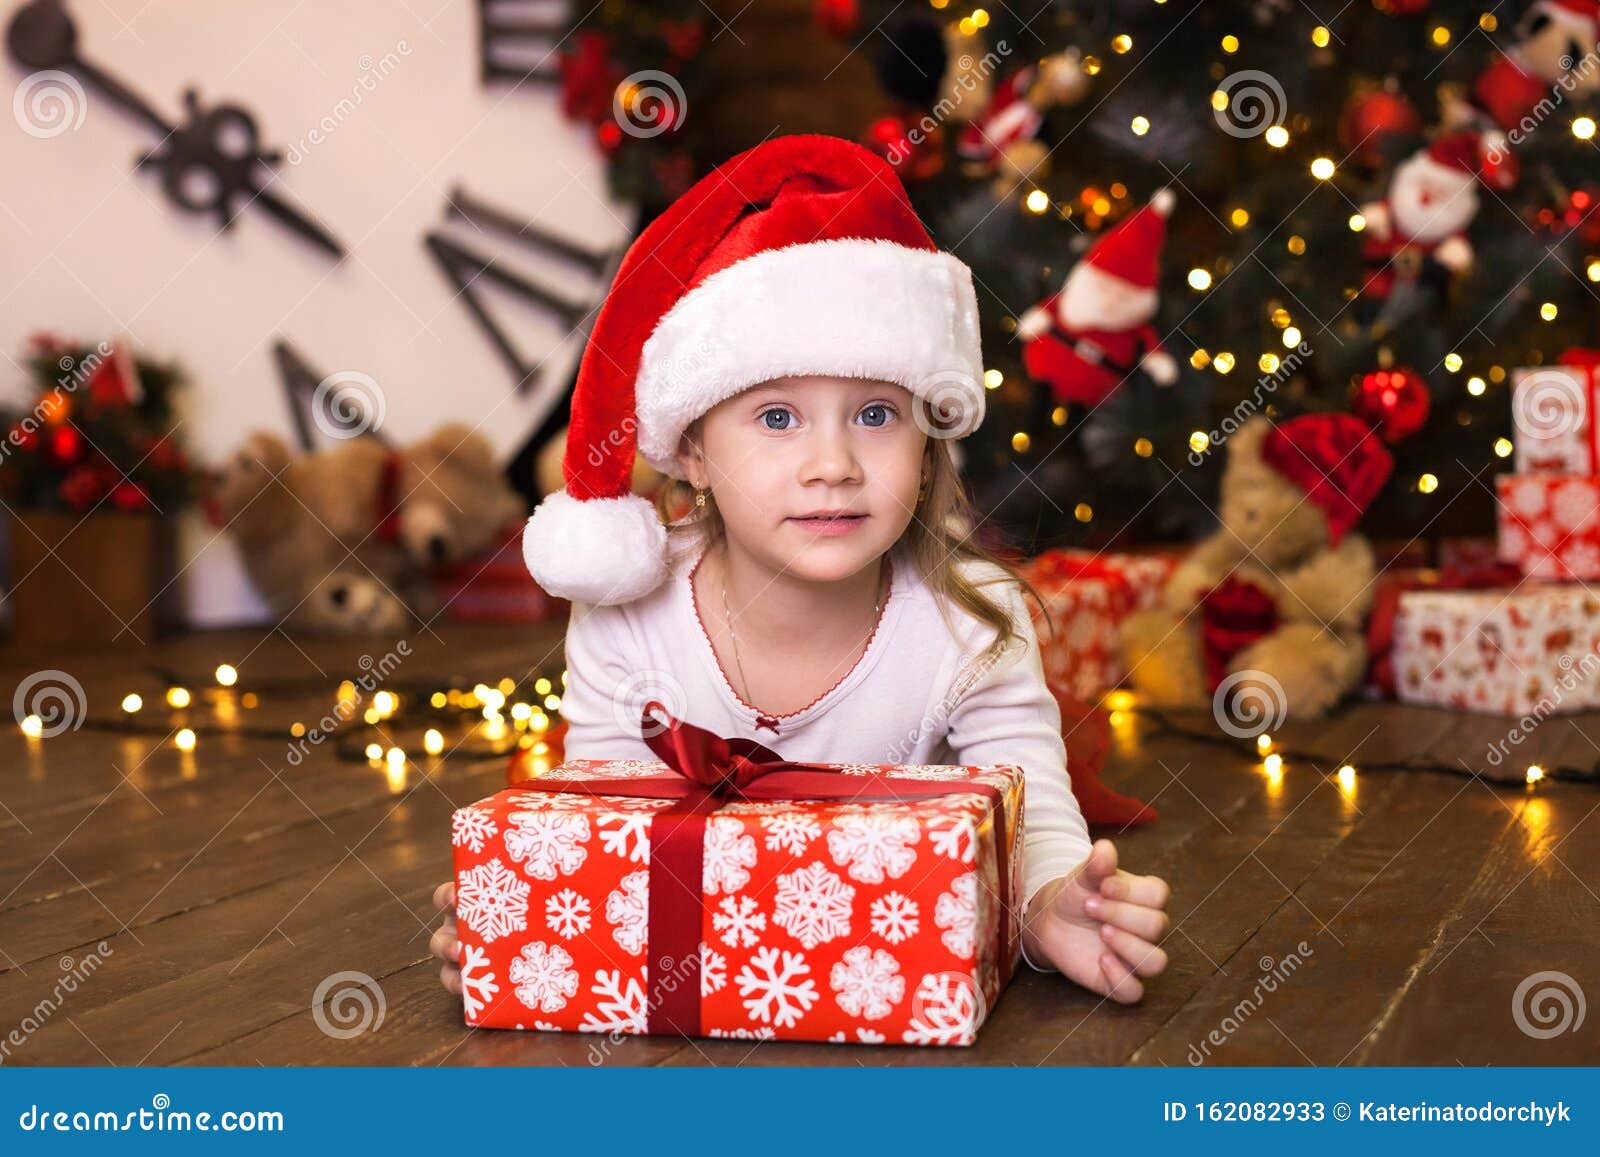 Merry Christmas And Happy Holidays. New Year 2020. Portrait Of Smiling Cute Little Girl In Red ...